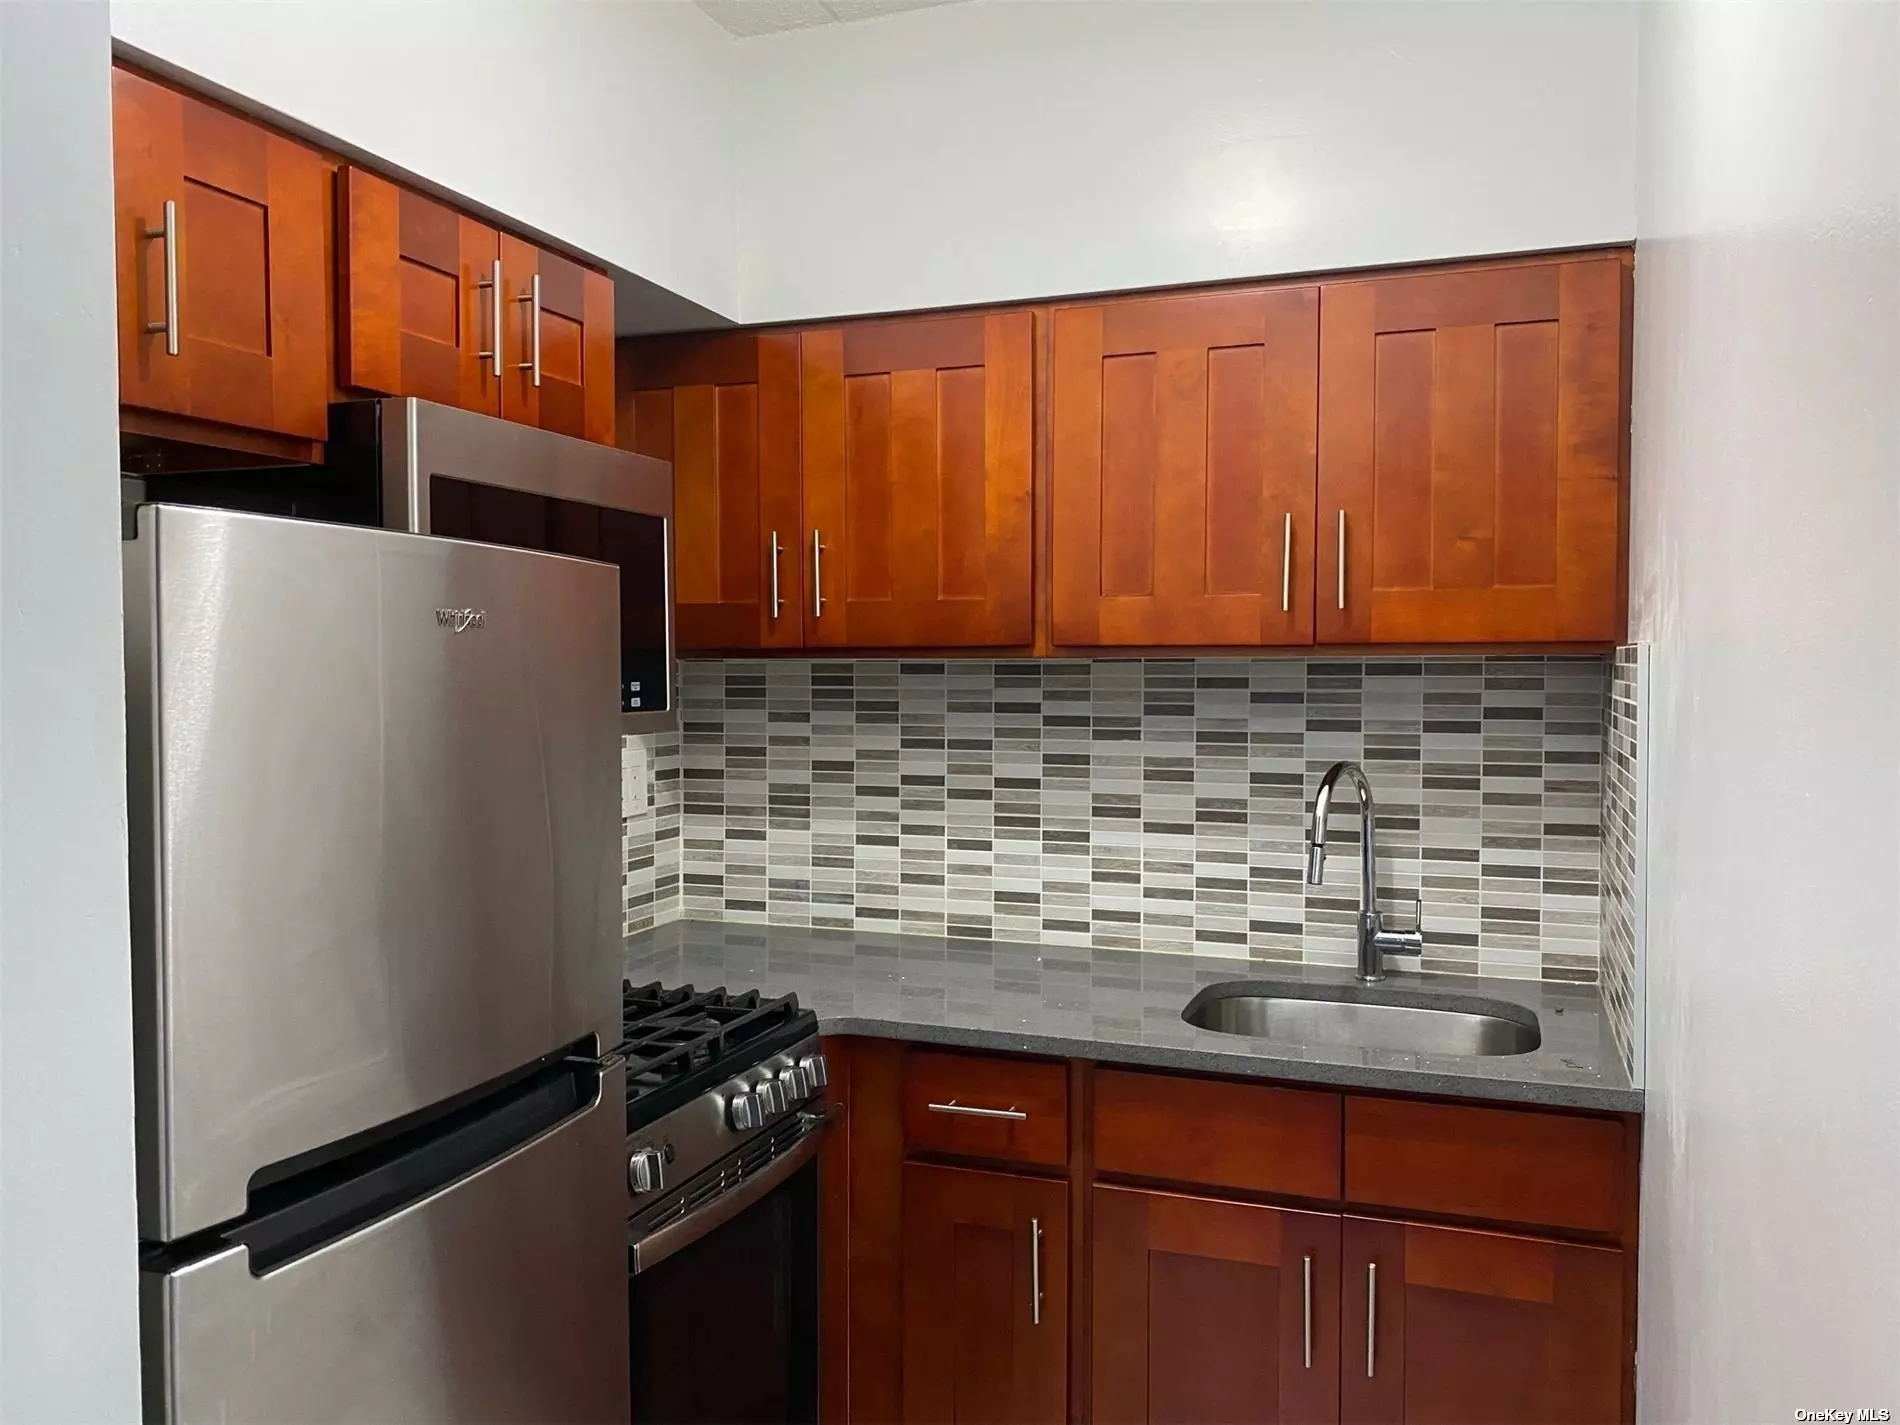 Very attractively priced. Don&rsquo;t miss it. Excellent location. Minutes walk in distance to the 7 train, LIRR, shops, banks, and medical facilities in downtown Flushing. Very close to area airports, highways, bridges and sports venues. Quiet block. Low common charge and property tax. Renovated studio condo unit. Great for investment or private use. Washer in unit. All info deemed reliable but not guaranteed. Verify on own before purchase.